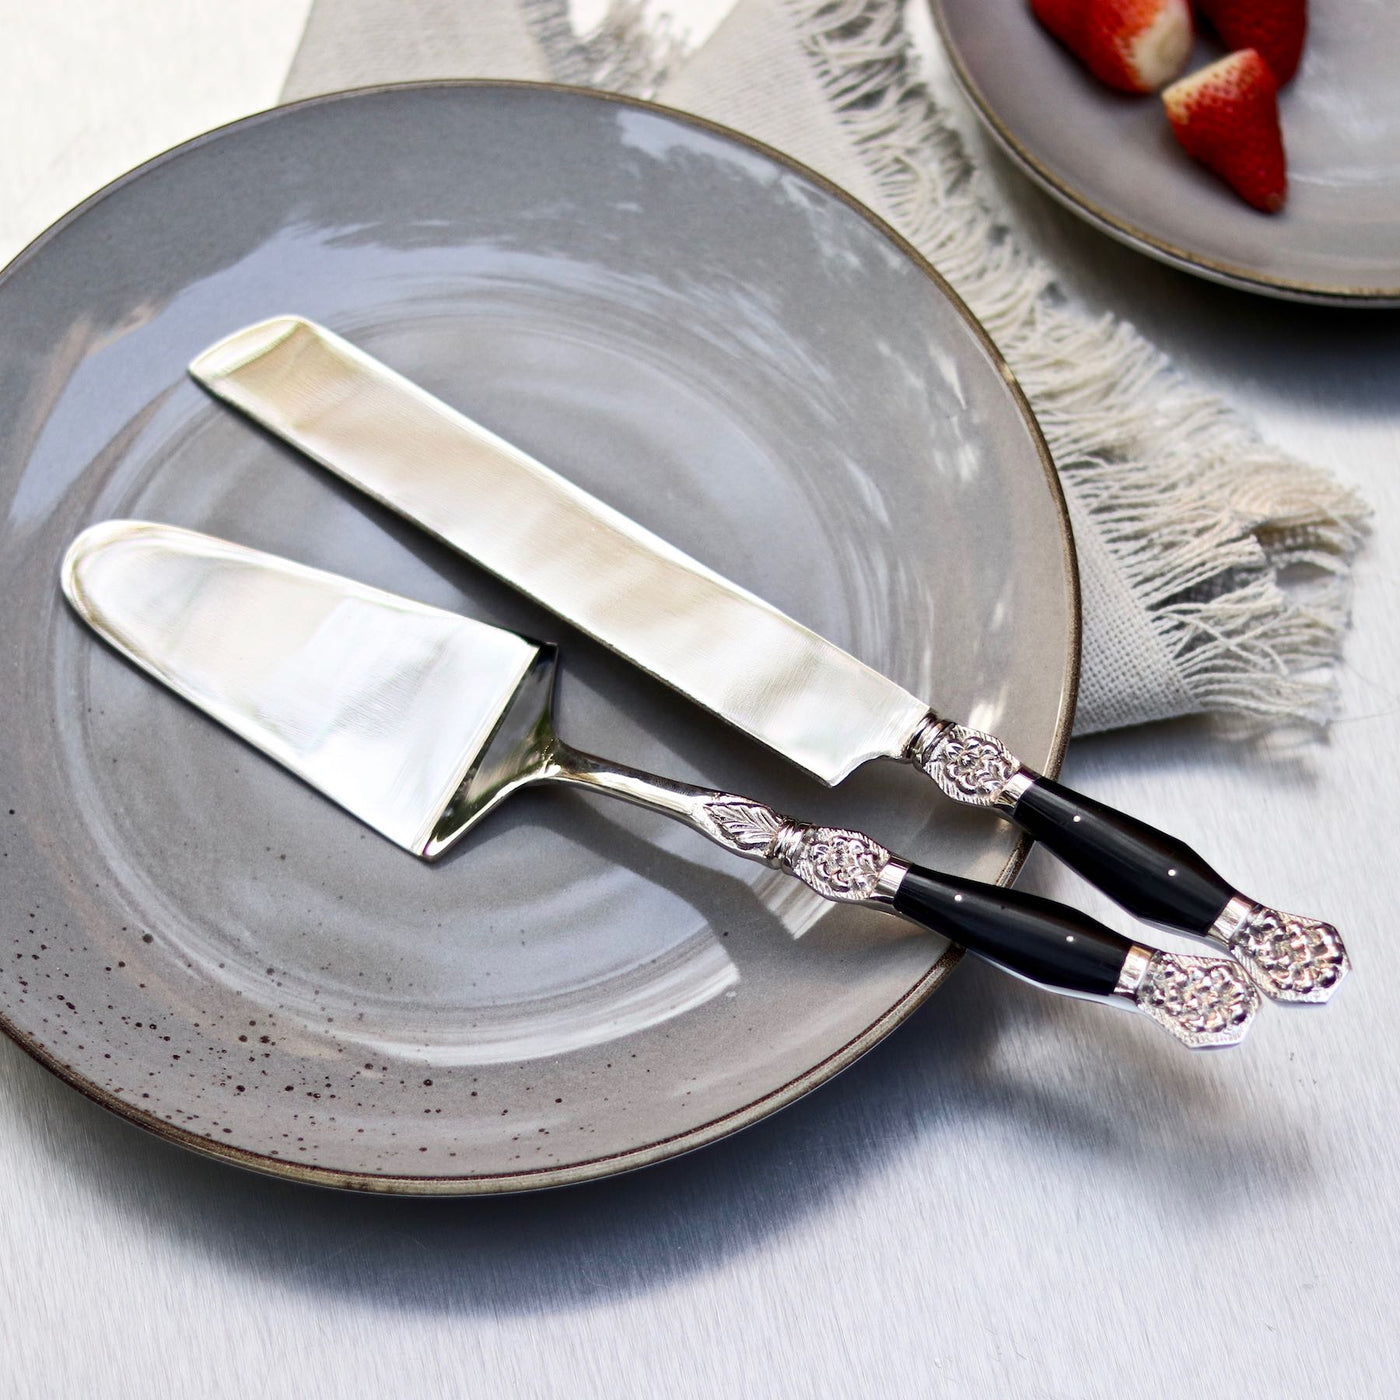 cake server and knife set with black inlay handles